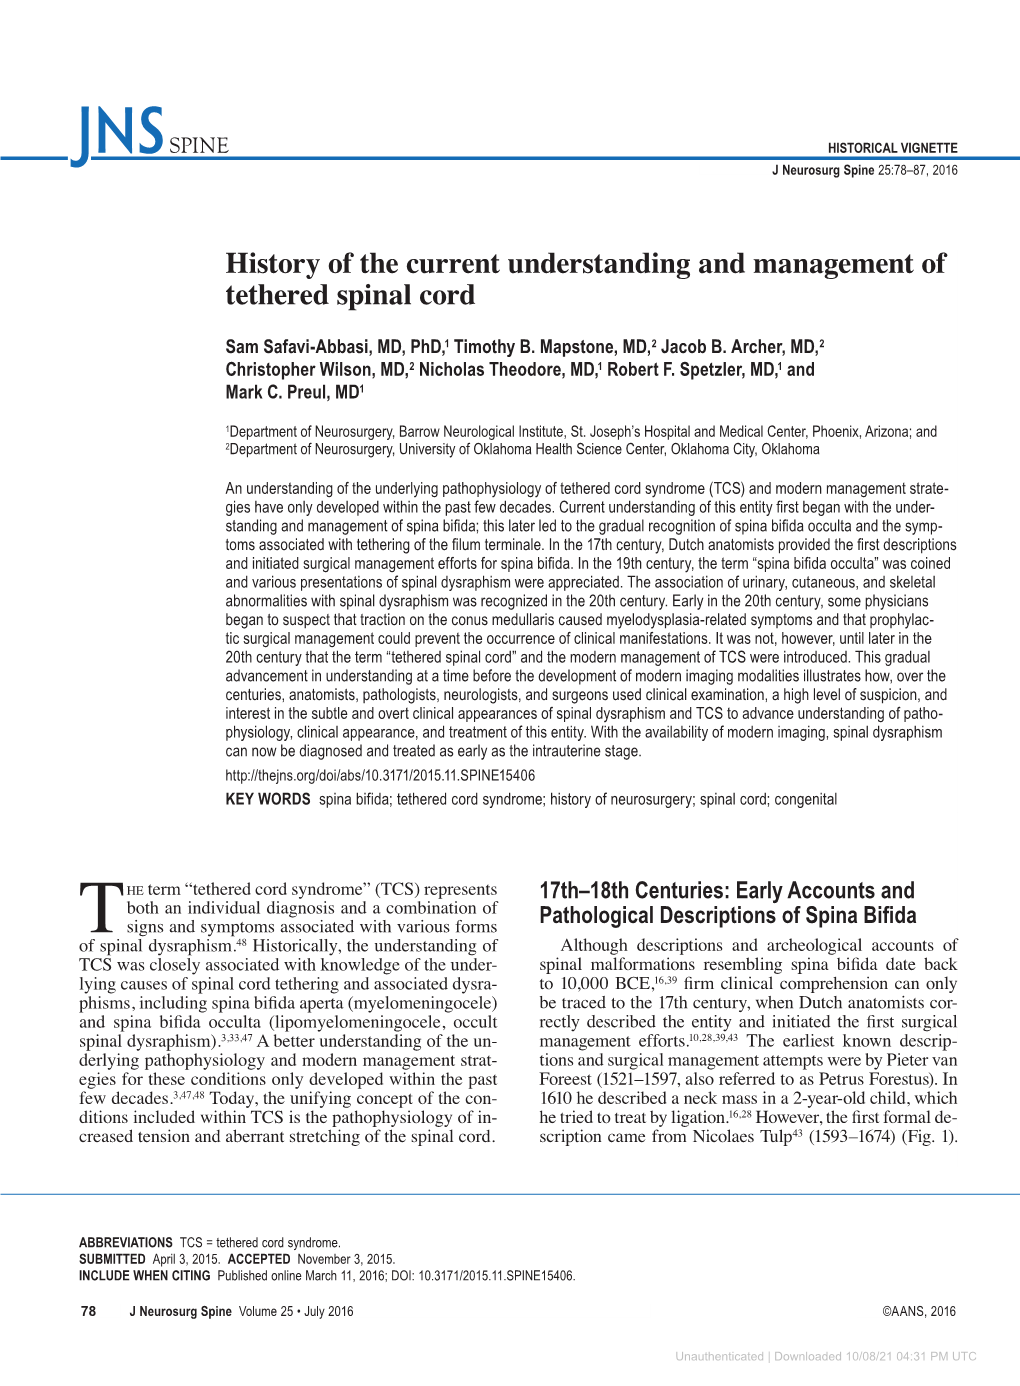 History of the Current Understanding and Management of Tethered Spinal Cord